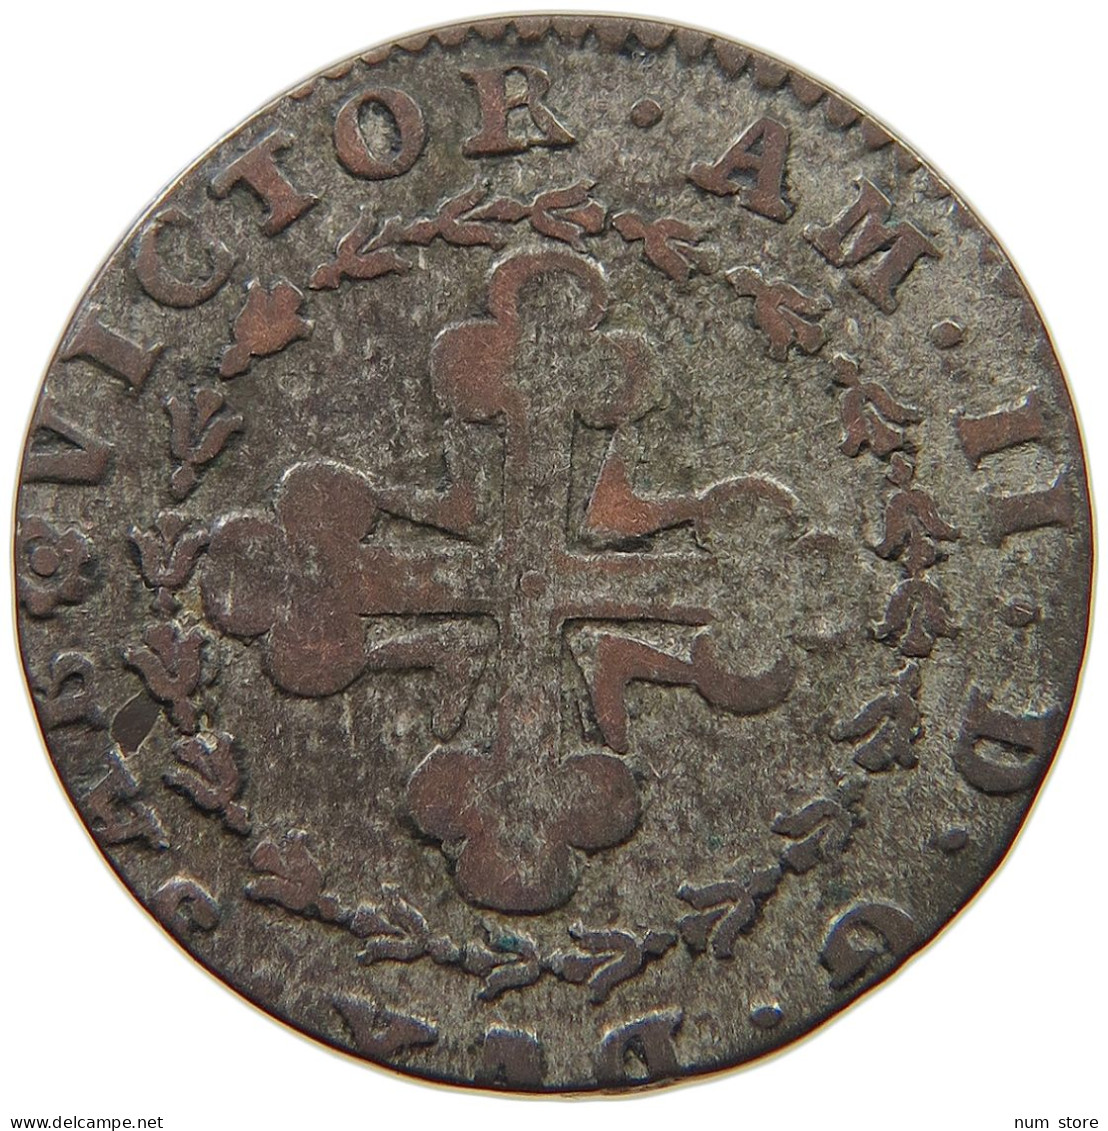 ITALY STATES SICILY 2.6 SOLDI 1691 VITTORIO AMEDEO II. #t107 0413 - Sizilien